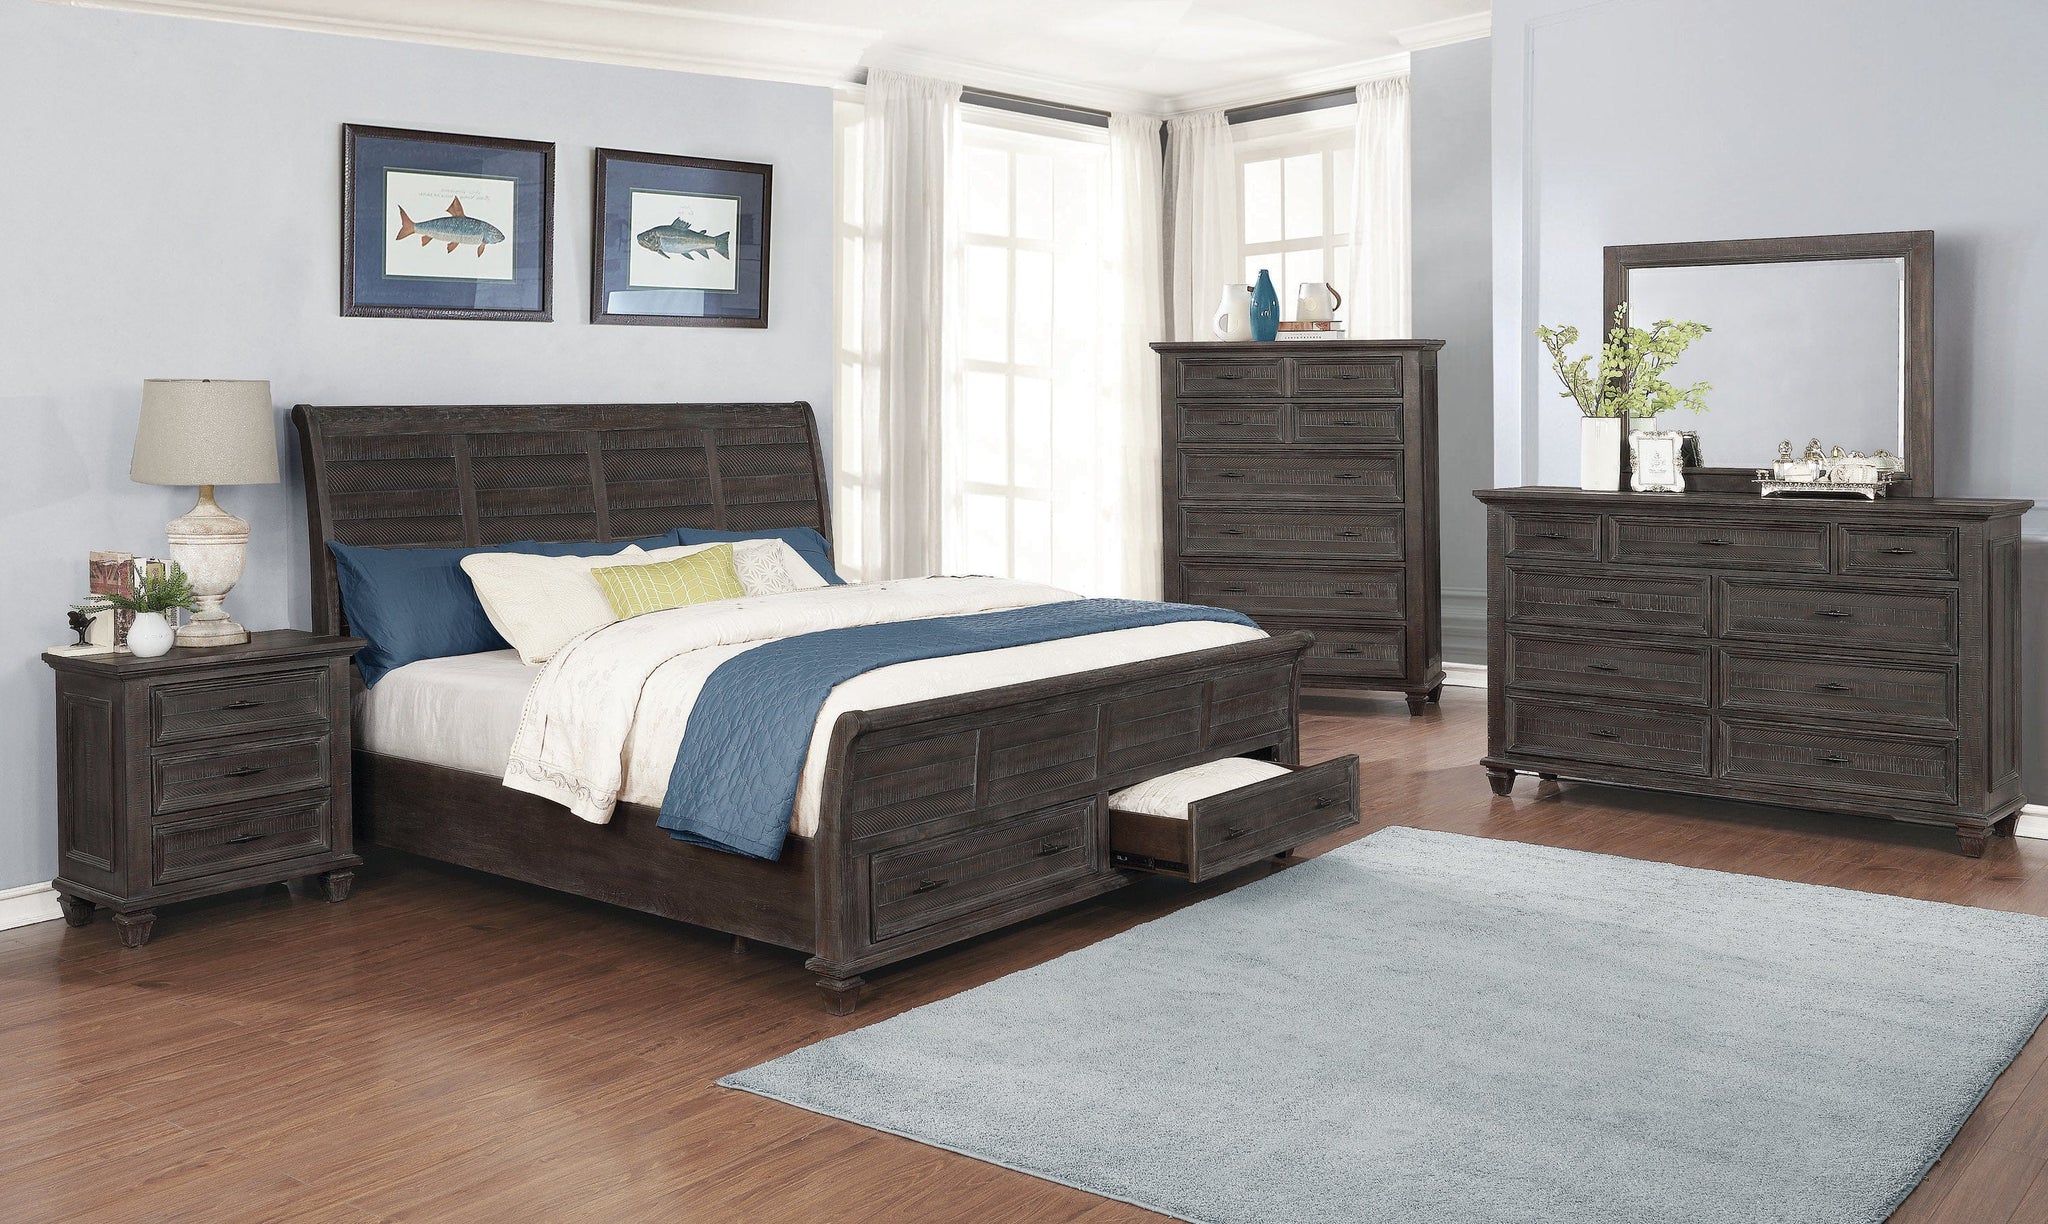 Atascadero Eastern King 2-Drawer Storage Bed Weathered Carbon Collection: Transitional Style Bed Captures The Attention In Your Room, Storage Drawers Add Functionality. A Bed To Relax On. SKU: 222880KE